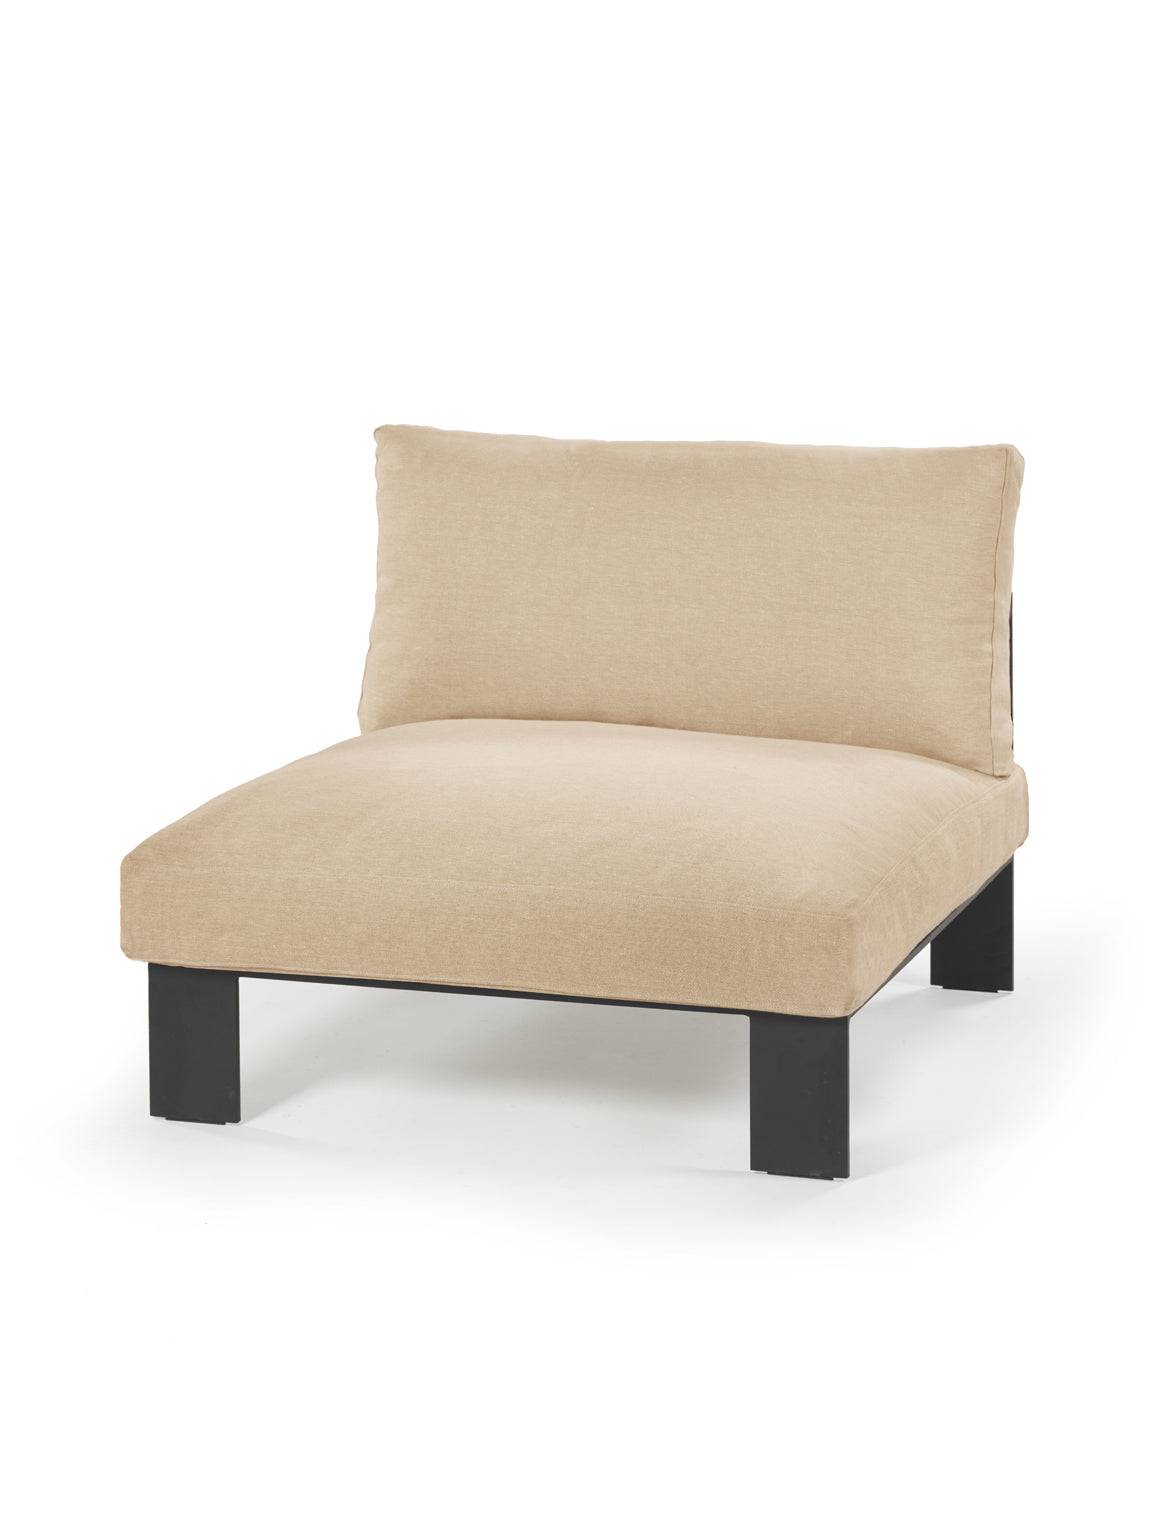 Mombaers Lounge Chair - Apricot